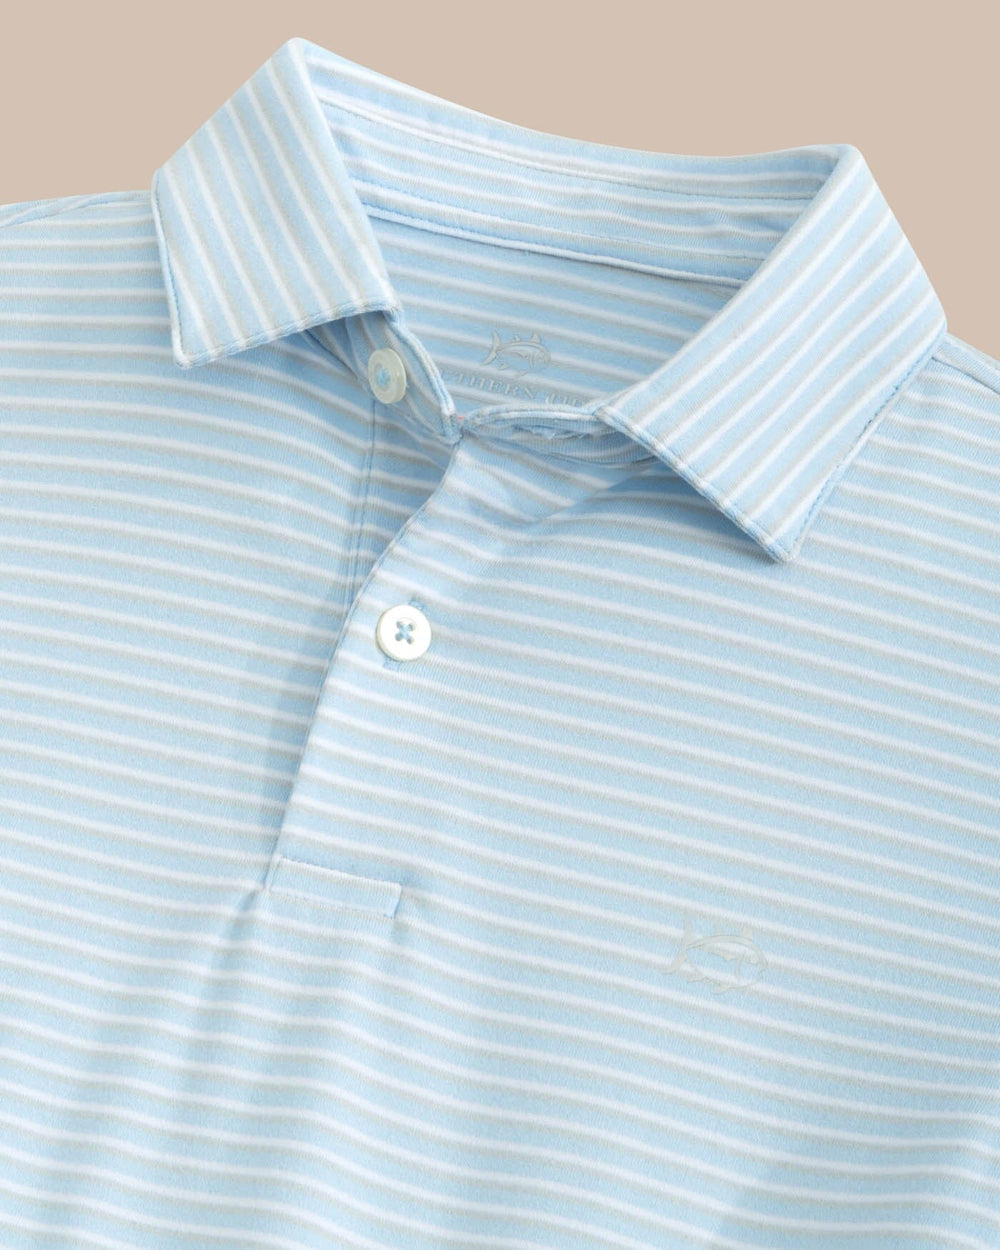 The detail view of the Southern Tide Kids Ryder Heather Halls Stripe Performance Polo by Southern Tide - Heather Clearwater Blue